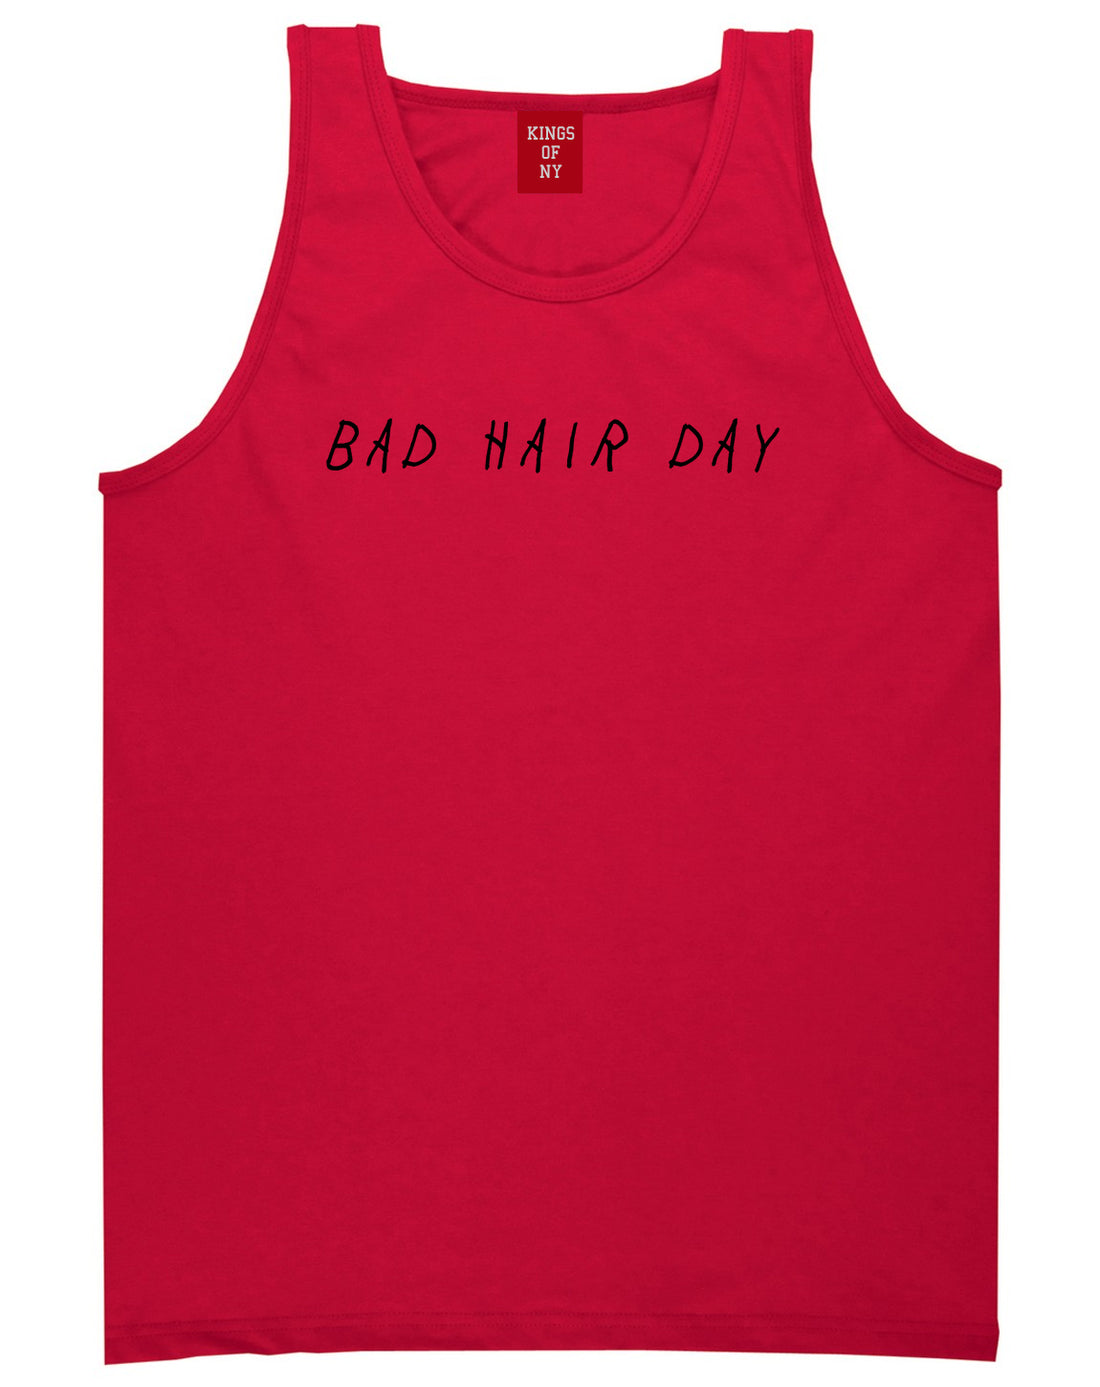 Bad Hair Day Red Tank Top Shirt by Kings Of NY